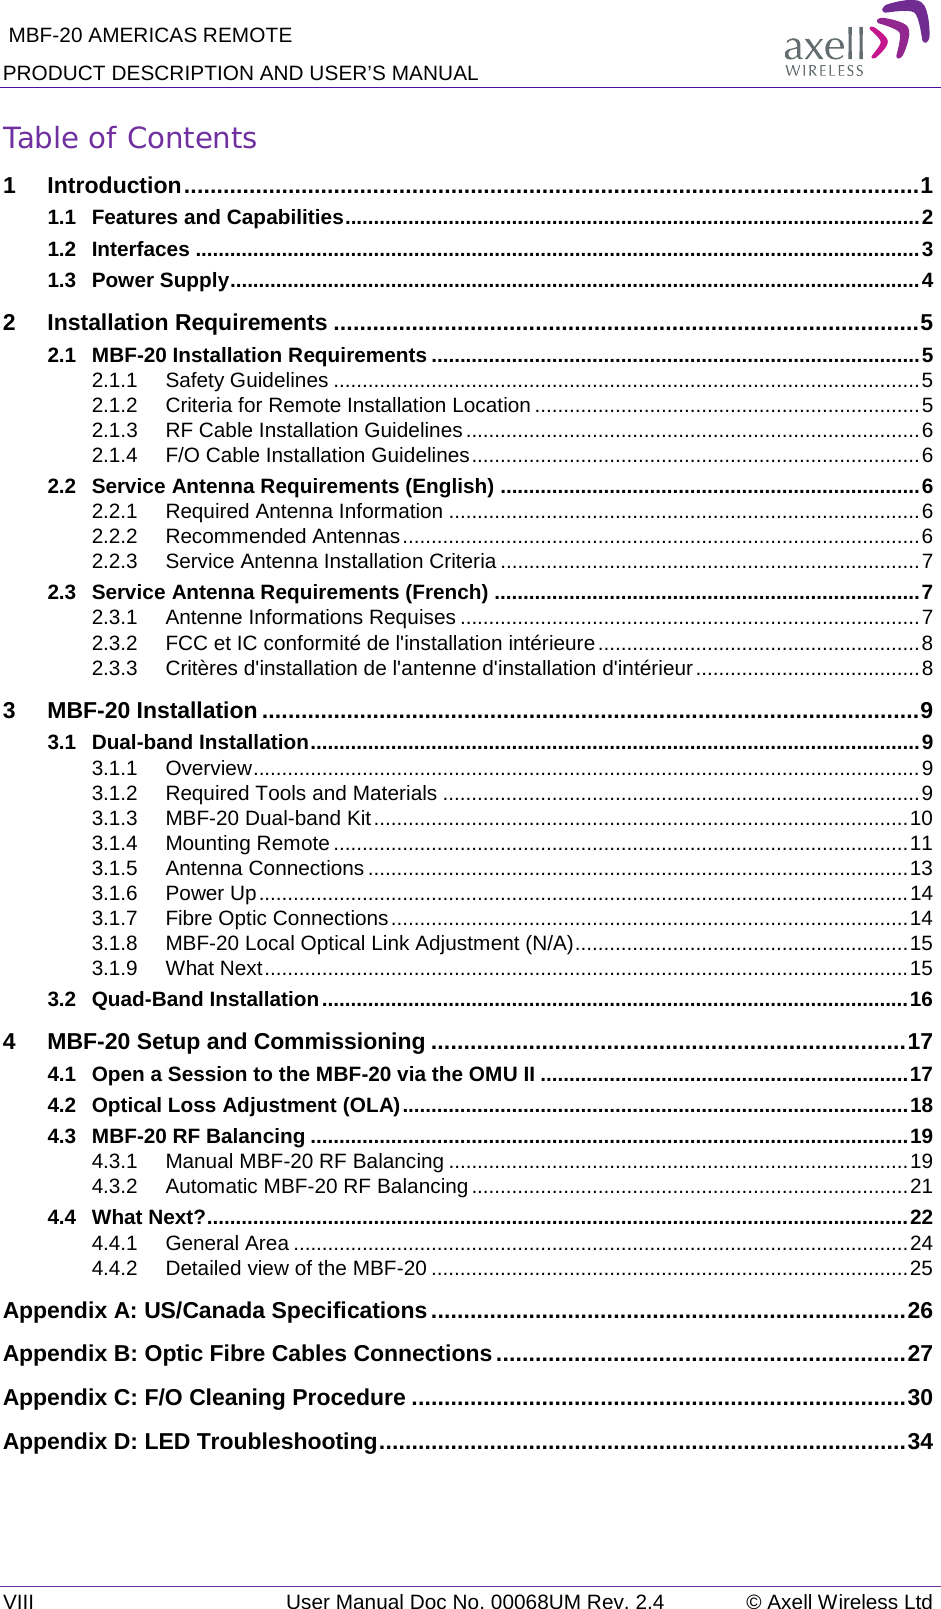  MBF-20 AMERICAS REMOTE PRODUCT DESCRIPTION AND USER’S MANUAL VIII   User Manual Doc No. 00068UM Rev. 2.4 © Axell Wireless Ltd Table of Contents 1 Introduction ................................................................................................................. 1 1.1 Features and Capabilities .................................................................................................... 2 1.2 Interfaces .............................................................................................................................. 3 1.3 Power Supply ........................................................................................................................ 4 2 Installation Requirements .......................................................................................... 5 2.1 MBF-20 Installation Requirements ..................................................................................... 5 2.1.1 Safety Guidelines ...................................................................................................... 5 2.1.2 Criteria for Remote Installation Location ................................................................... 5 2.1.3 RF Cable Installation Guidelines ............................................................................... 6 2.1.4 F/O Cable Installation Guidelines .............................................................................. 6 2.2 Service Antenna Requirements (English) ......................................................................... 6 2.2.1 Required Antenna Information .................................................................................. 6 2.2.2 Recommended Antennas .......................................................................................... 6 2.2.3 Service Antenna Installation Criteria ......................................................................... 7 2.3 Service Antenna Requirements (French) .......................................................................... 7 2.3.1 Antenne Informations Requises ................................................................................ 7 2.3.2 FCC et IC conformité de l&apos;installation intérieure ........................................................ 8 2.3.3 Critères d&apos;installation de l&apos;antenne d&apos;installation d&apos;intérieur ....................................... 8 3 MBF-20 Installation ..................................................................................................... 9 3.1 Dual-band Installation .......................................................................................................... 9 3.1.1 Overview .................................................................................................................... 9 3.1.2 Required Tools and Materials ................................................................................... 9 3.1.3 MBF-20 Dual-band Kit ............................................................................................. 10 3.1.4 Mounting Remote .................................................................................................... 11 3.1.5 Antenna Connections .............................................................................................. 13 3.1.6 Power Up ................................................................................................................. 14 3.1.7 Fibre Optic Connections .......................................................................................... 14 3.1.8 MBF-20 Local Optical Link Adjustment (N/A) .......................................................... 15 3.1.9 What Next ................................................................................................................ 15 3.2 Quad-Band Installation ...................................................................................................... 16 4 MBF-20 Setup and Commissioning ......................................................................... 17 4.1 Open a Session to the MBF-20 via the OMU II ................................................................ 17 4.2 Optical Loss Adjustment (OLA) ........................................................................................ 18 4.3 MBF-20 RF Balancing ........................................................................................................ 19 4.3.1 Manual MBF-20 RF Balancing ................................................................................ 19 4.3.2 Automatic MBF-20 RF Balancing ............................................................................ 21 4.4 What Next? .......................................................................................................................... 22 4.4.1 General Area ........................................................................................................... 24 4.4.2 Detailed view of the MBF-20 ................................................................................... 25 Appendix A: US/Canada Specifications ......................................................................... 26 Appendix B: Optic Fibre Cables Connections ............................................................... 27 Appendix C: F/O Cleaning Procedure ............................................................................ 30 Appendix D: LED Troubleshooting ................................................................................. 34    